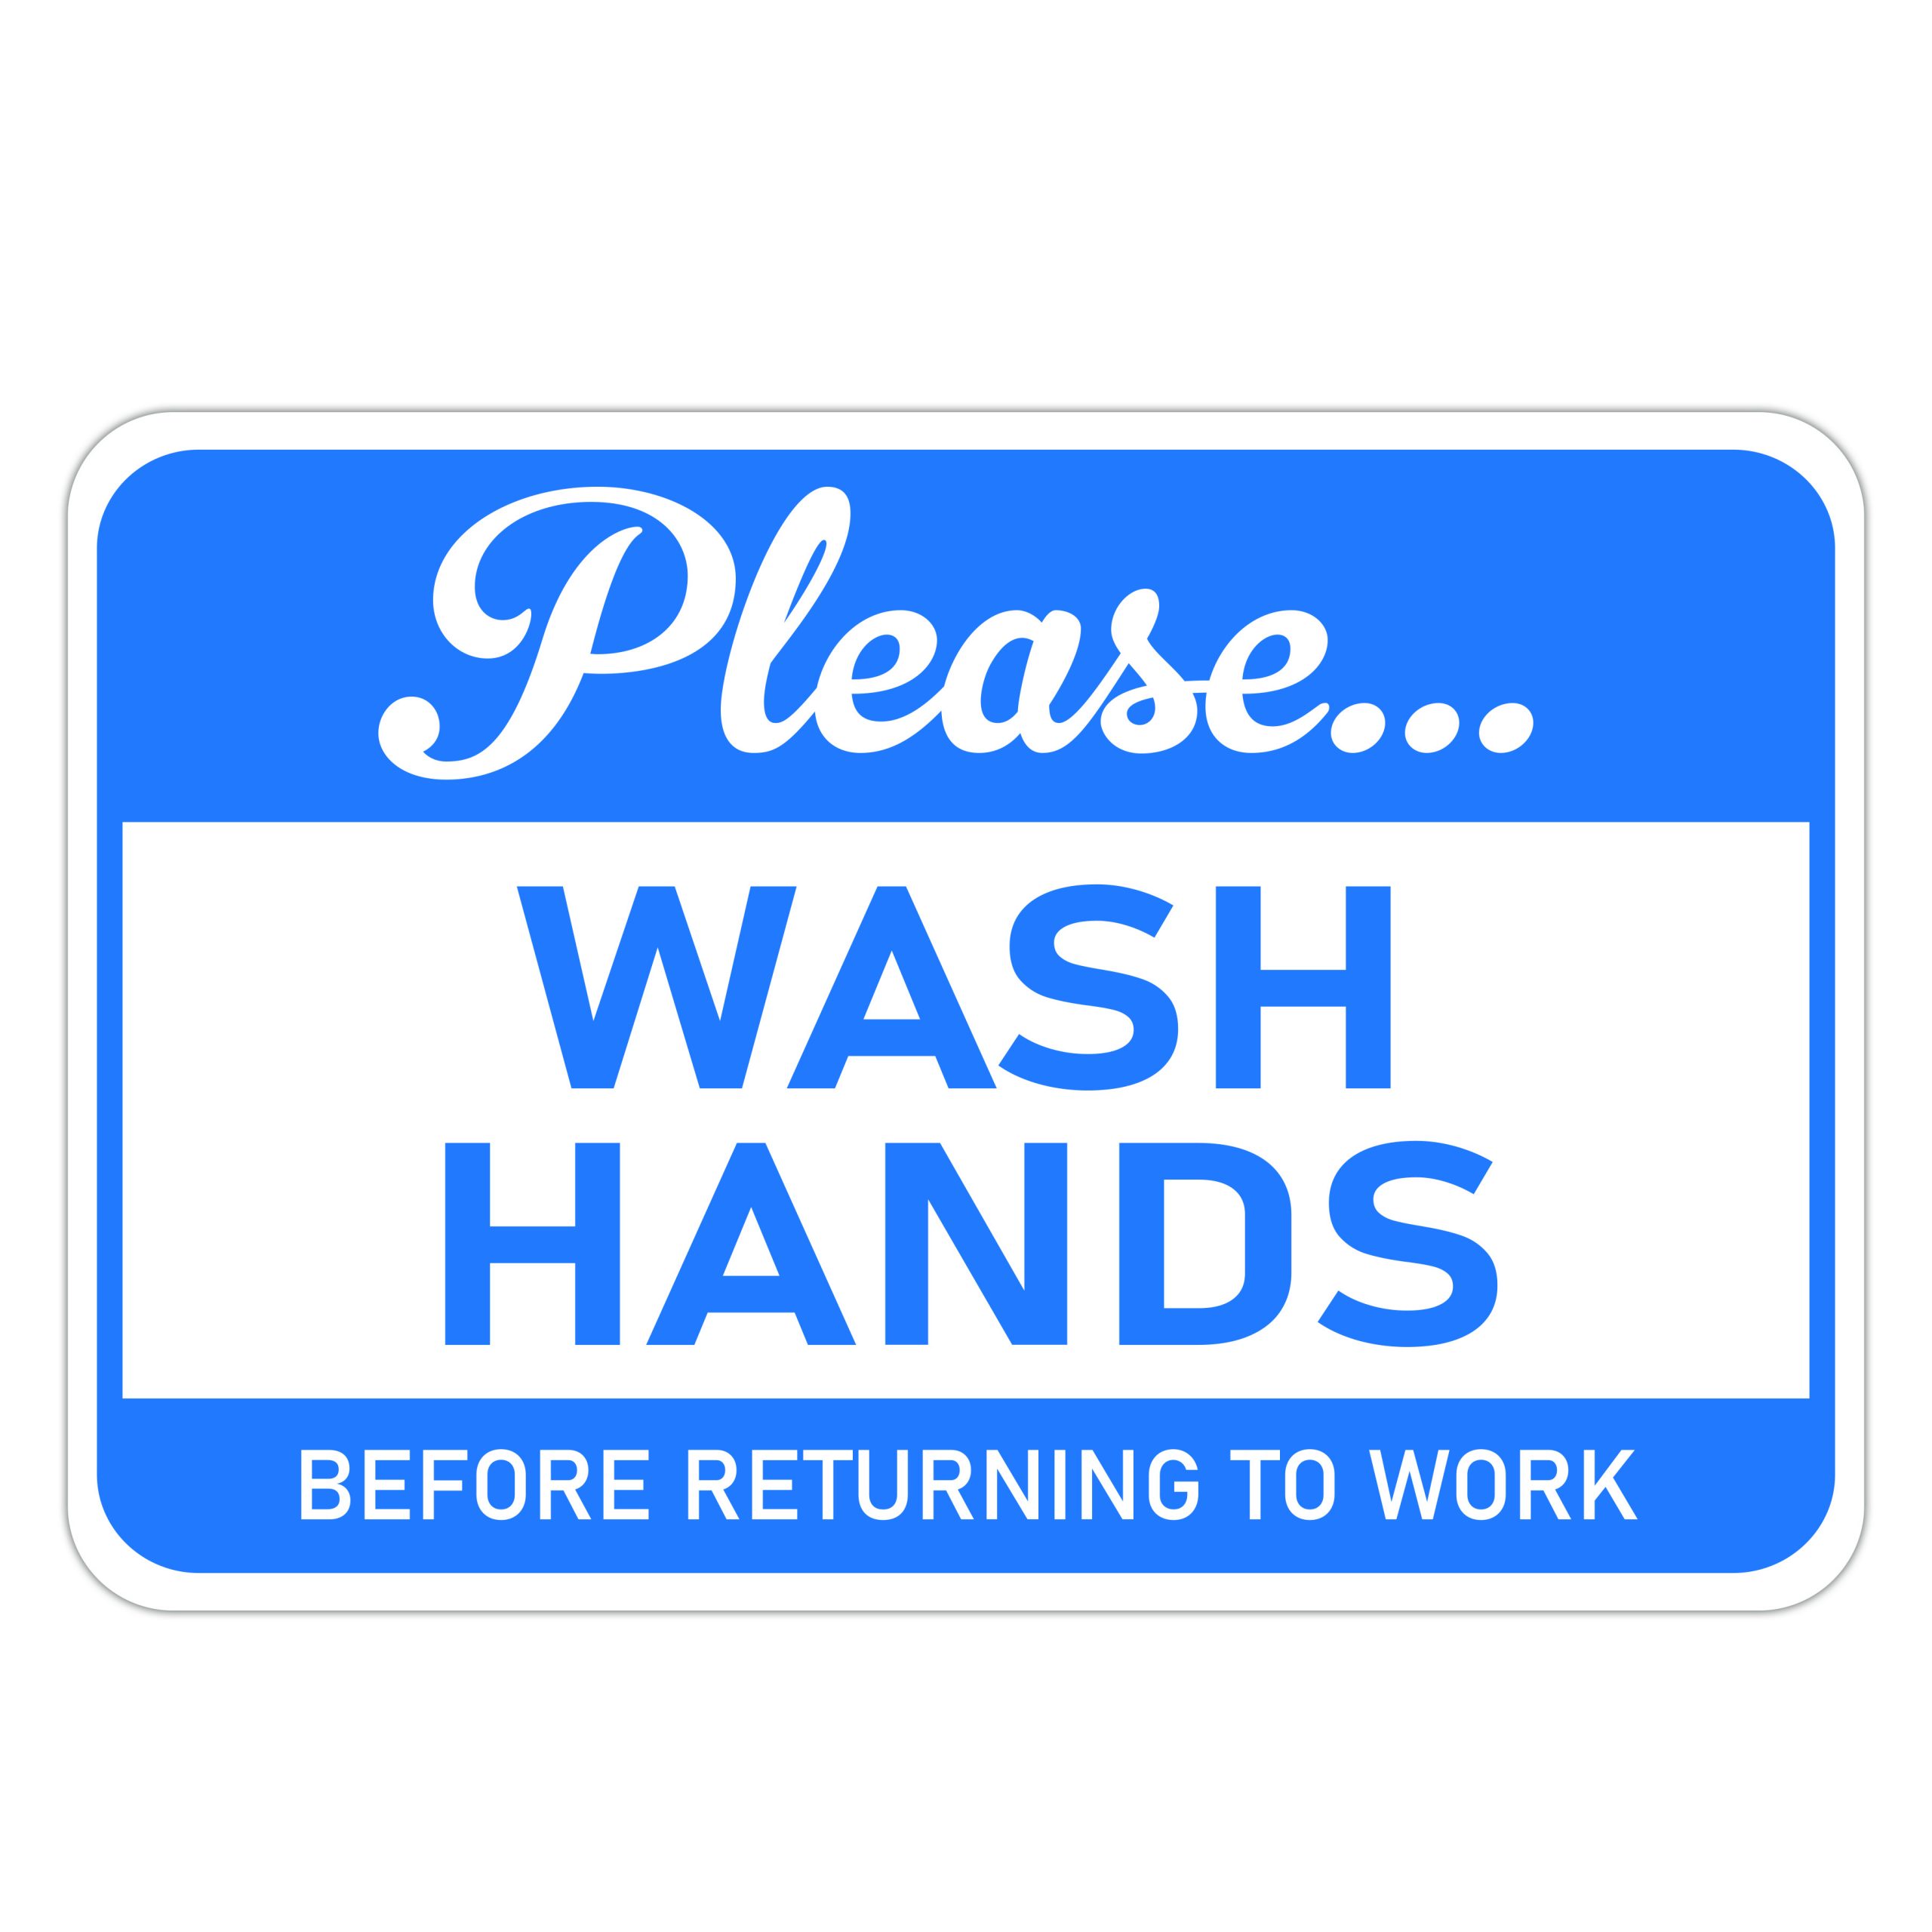 PLEASE WASH HANDS - American Sign Company